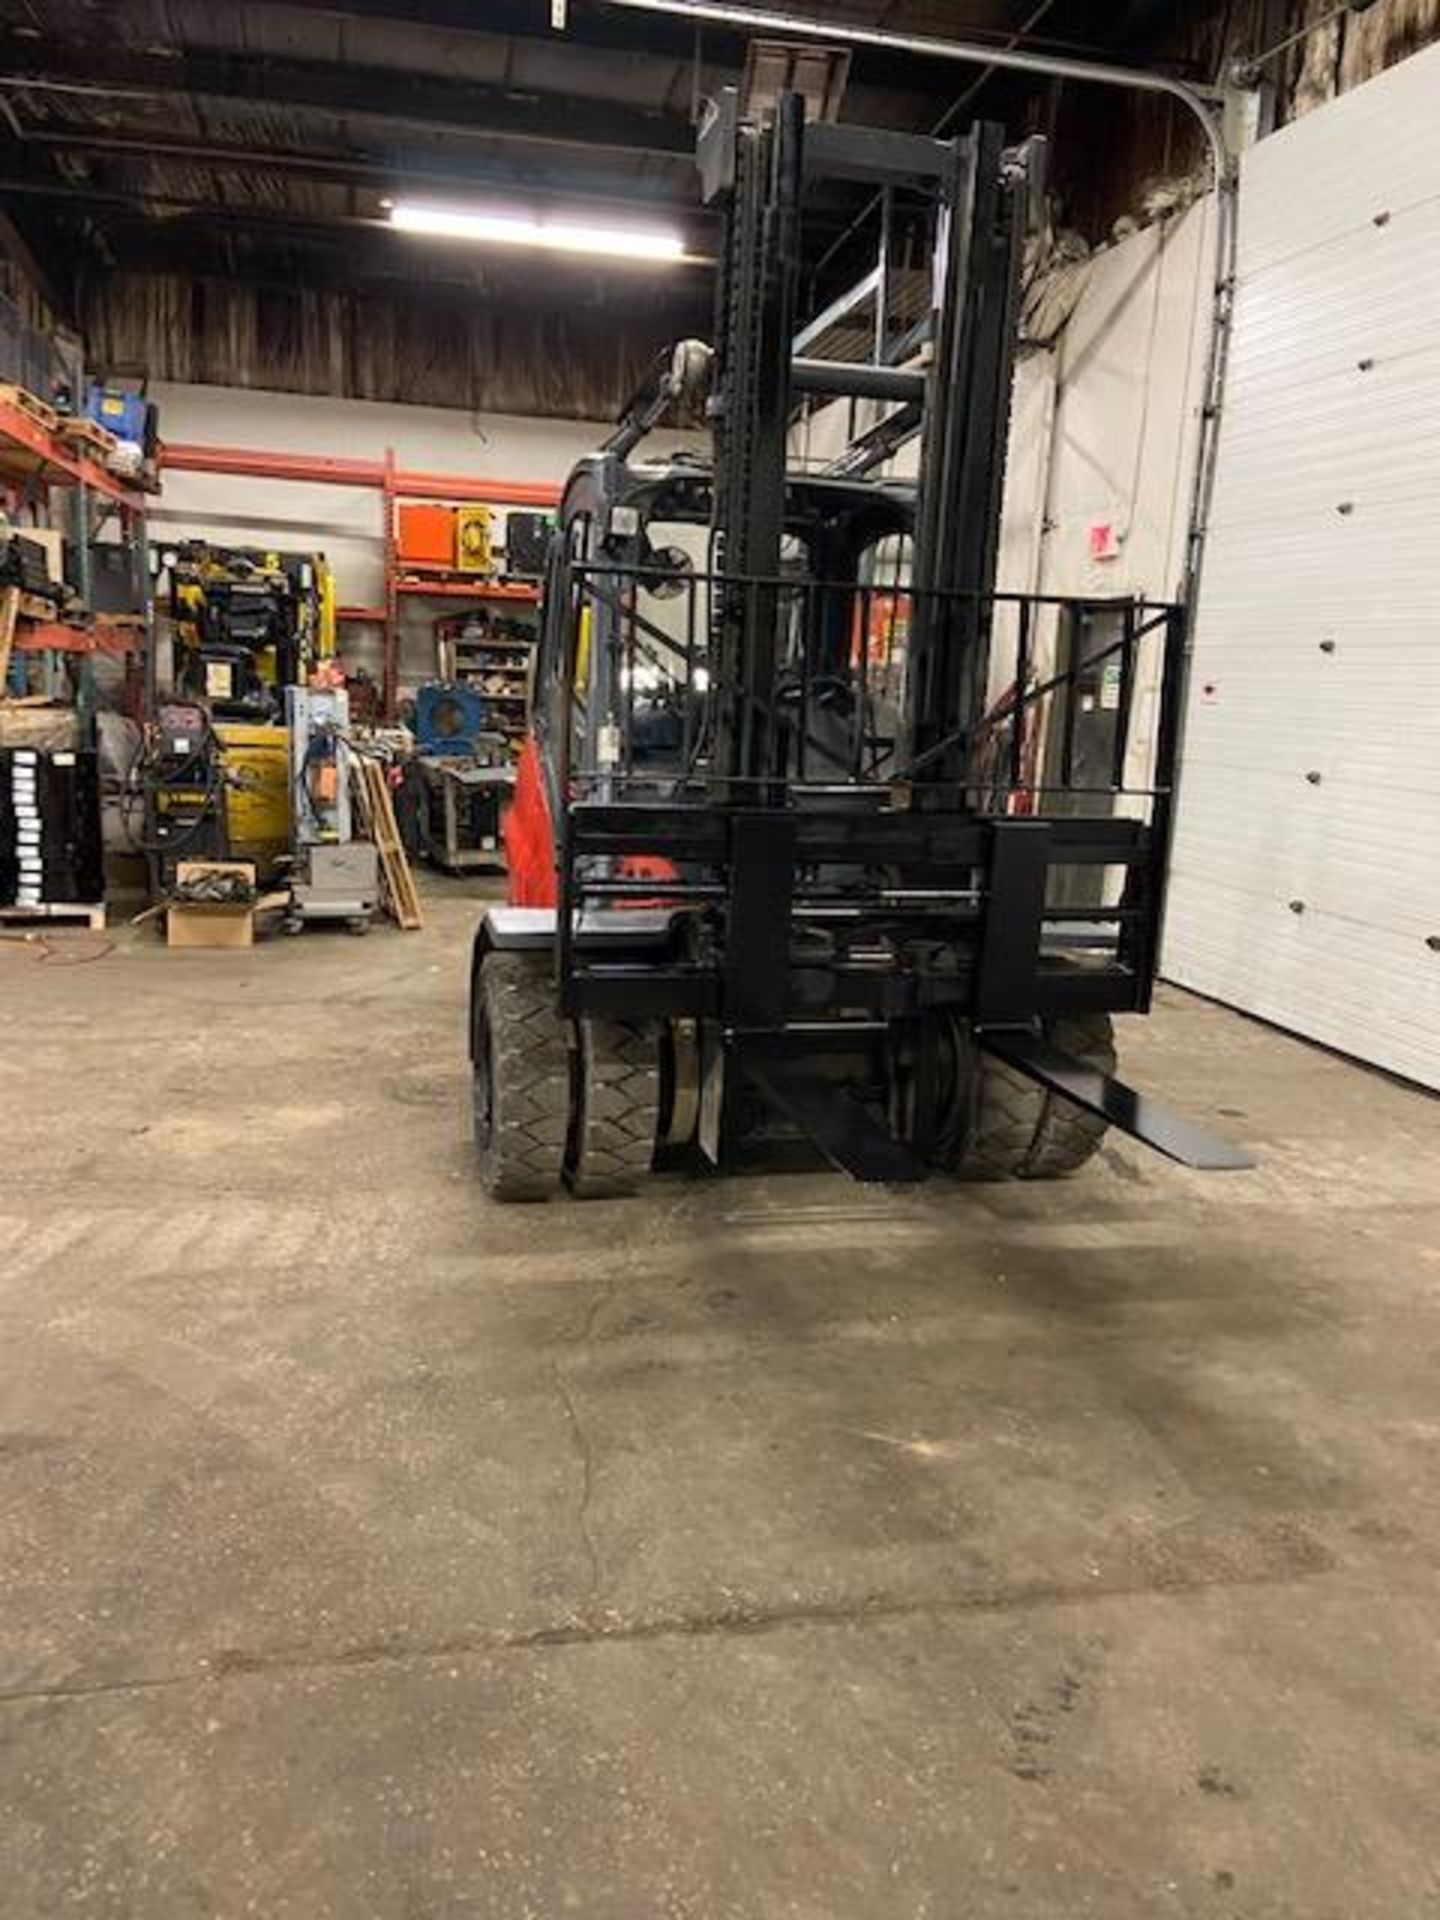 FREE CUSTOMS - 2012 Linde 10,000lbs OUTDOOR Forklift with NICE CAB & sideshift & fork positioner - Image 2 of 3